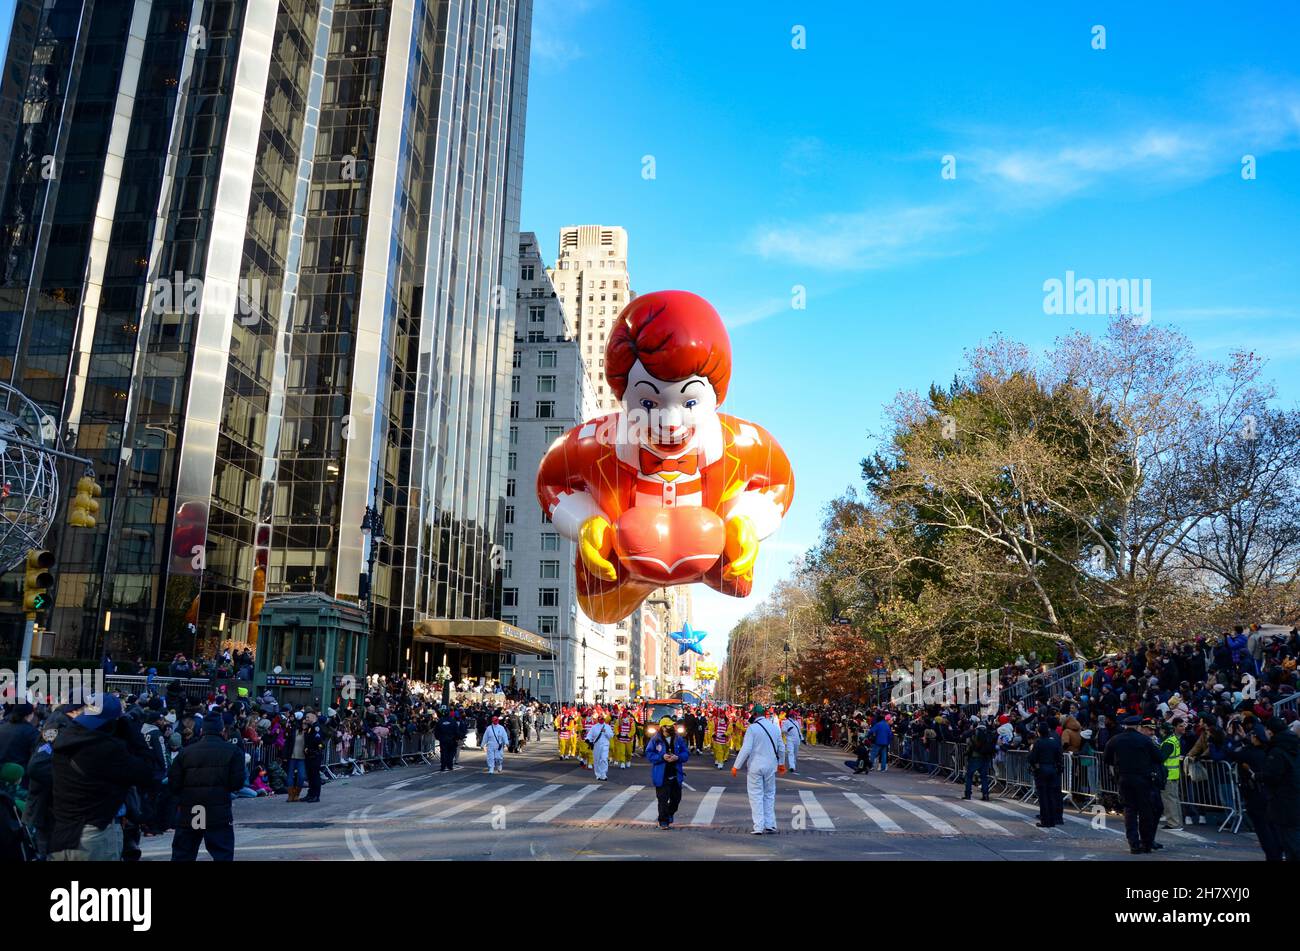 New York, United States. 25th Nov, 2021. Ronald McDonald characters are seen marching over Sixth Avenue during the 95th annual Macy's Thanksgiving Day Parade in New York City on November 25, 2021. (Photo by Ryan Rahman/Pacific Press) Credit: Pacific Press Media Production Corp./Alamy Live News Stock Photo